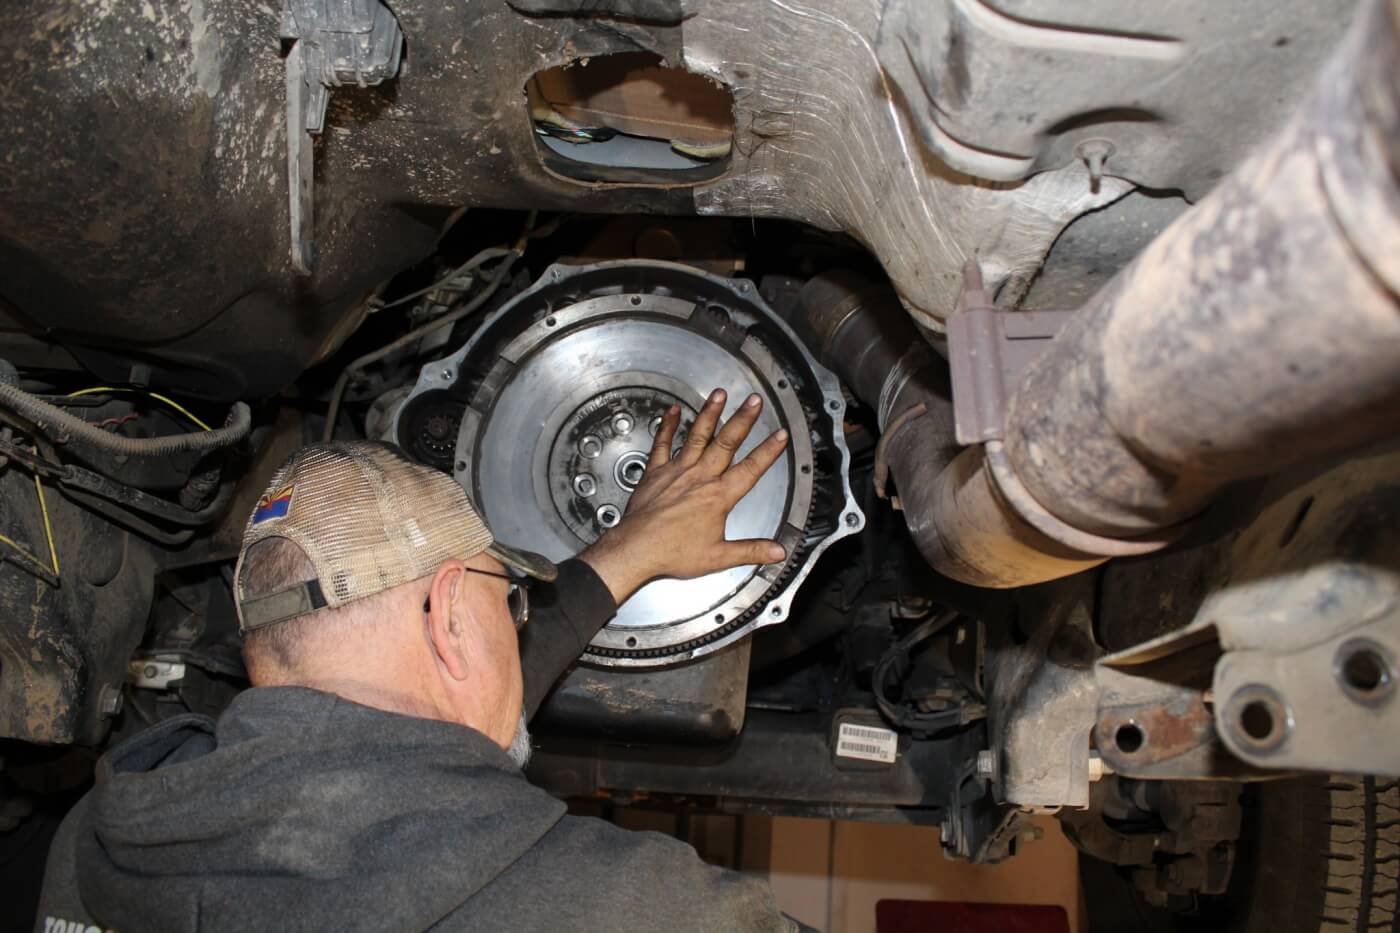 8. As mentioned earlier, this truck had already been upgraded with an aftermarket flywheel and clutch to replace the troublesome dual-mass system that the factory uses. Still, the Centerforce kit incorporates a new flywheel that must be used with the Diesel Twin assembly, so Hughes removed the old one. Keep a hand on the flywheel during flywheel removal, as it’s heavy enough to do some serious damage to feet and/or concrete if it falls off!